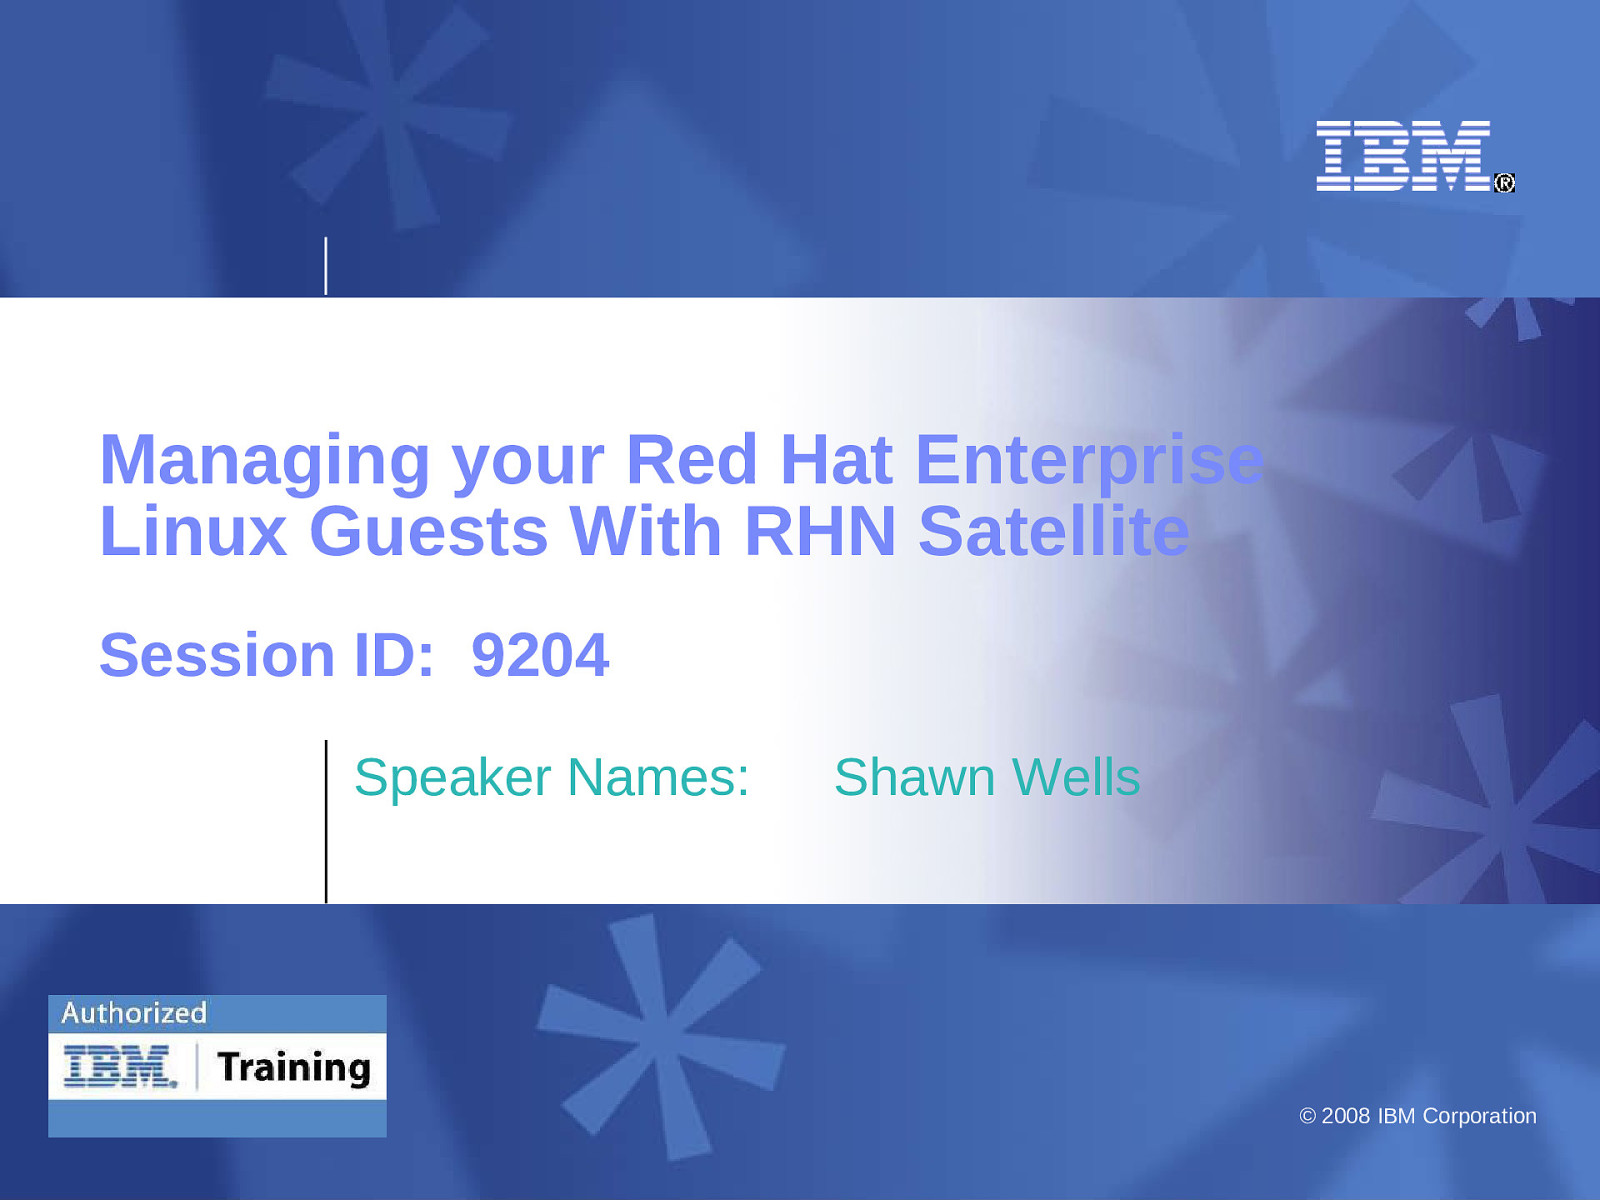 Session 9204: Managing your Red Hat Enterprise Linux Guests with RHN Satellite